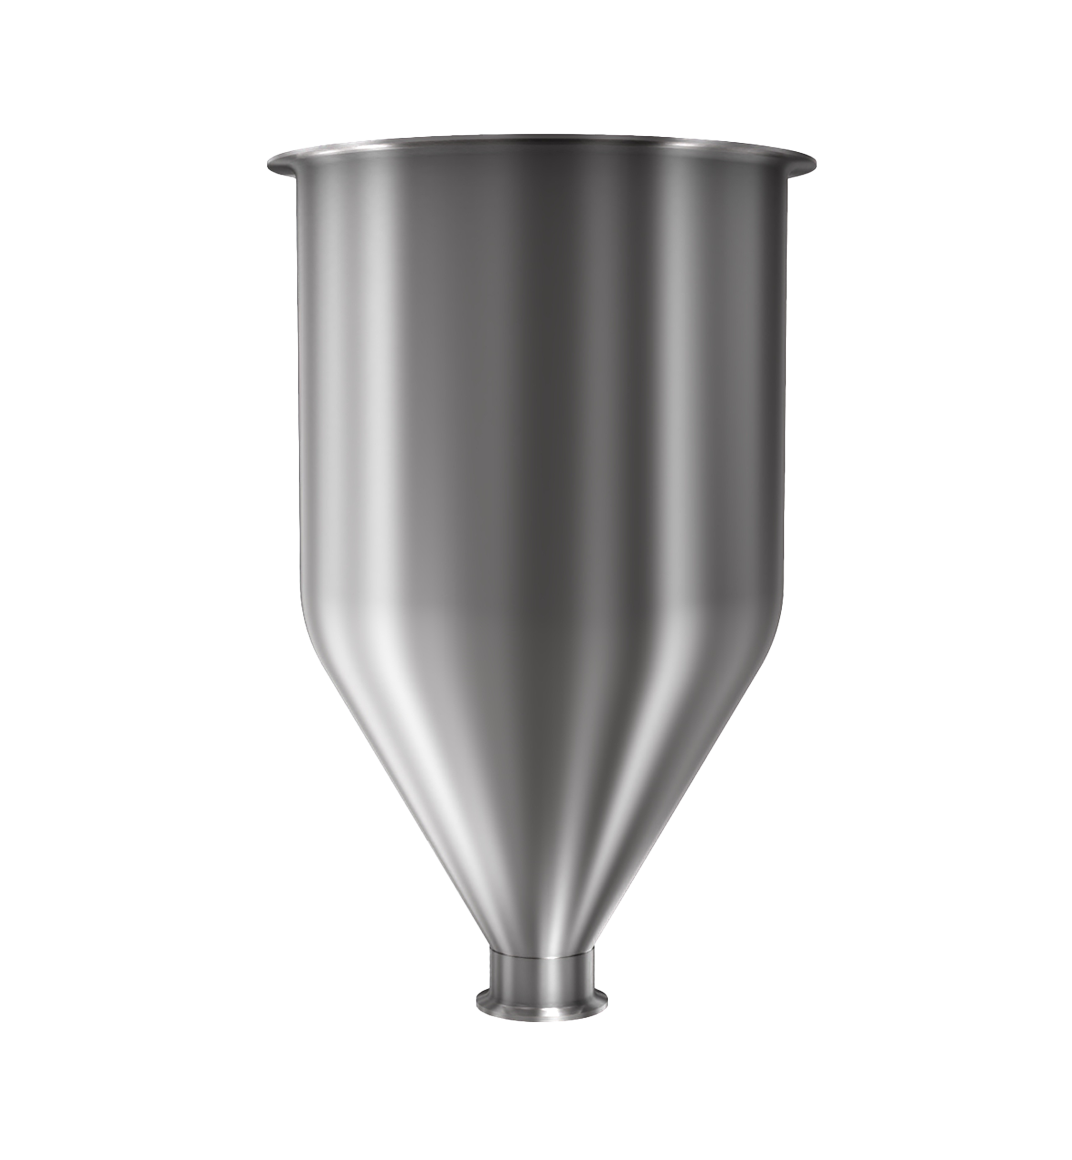 316 Stainless Steel funnel with 1 1/2" sanitary fitting 1.5 gallons, 8.85" ID x 10.14" OAH